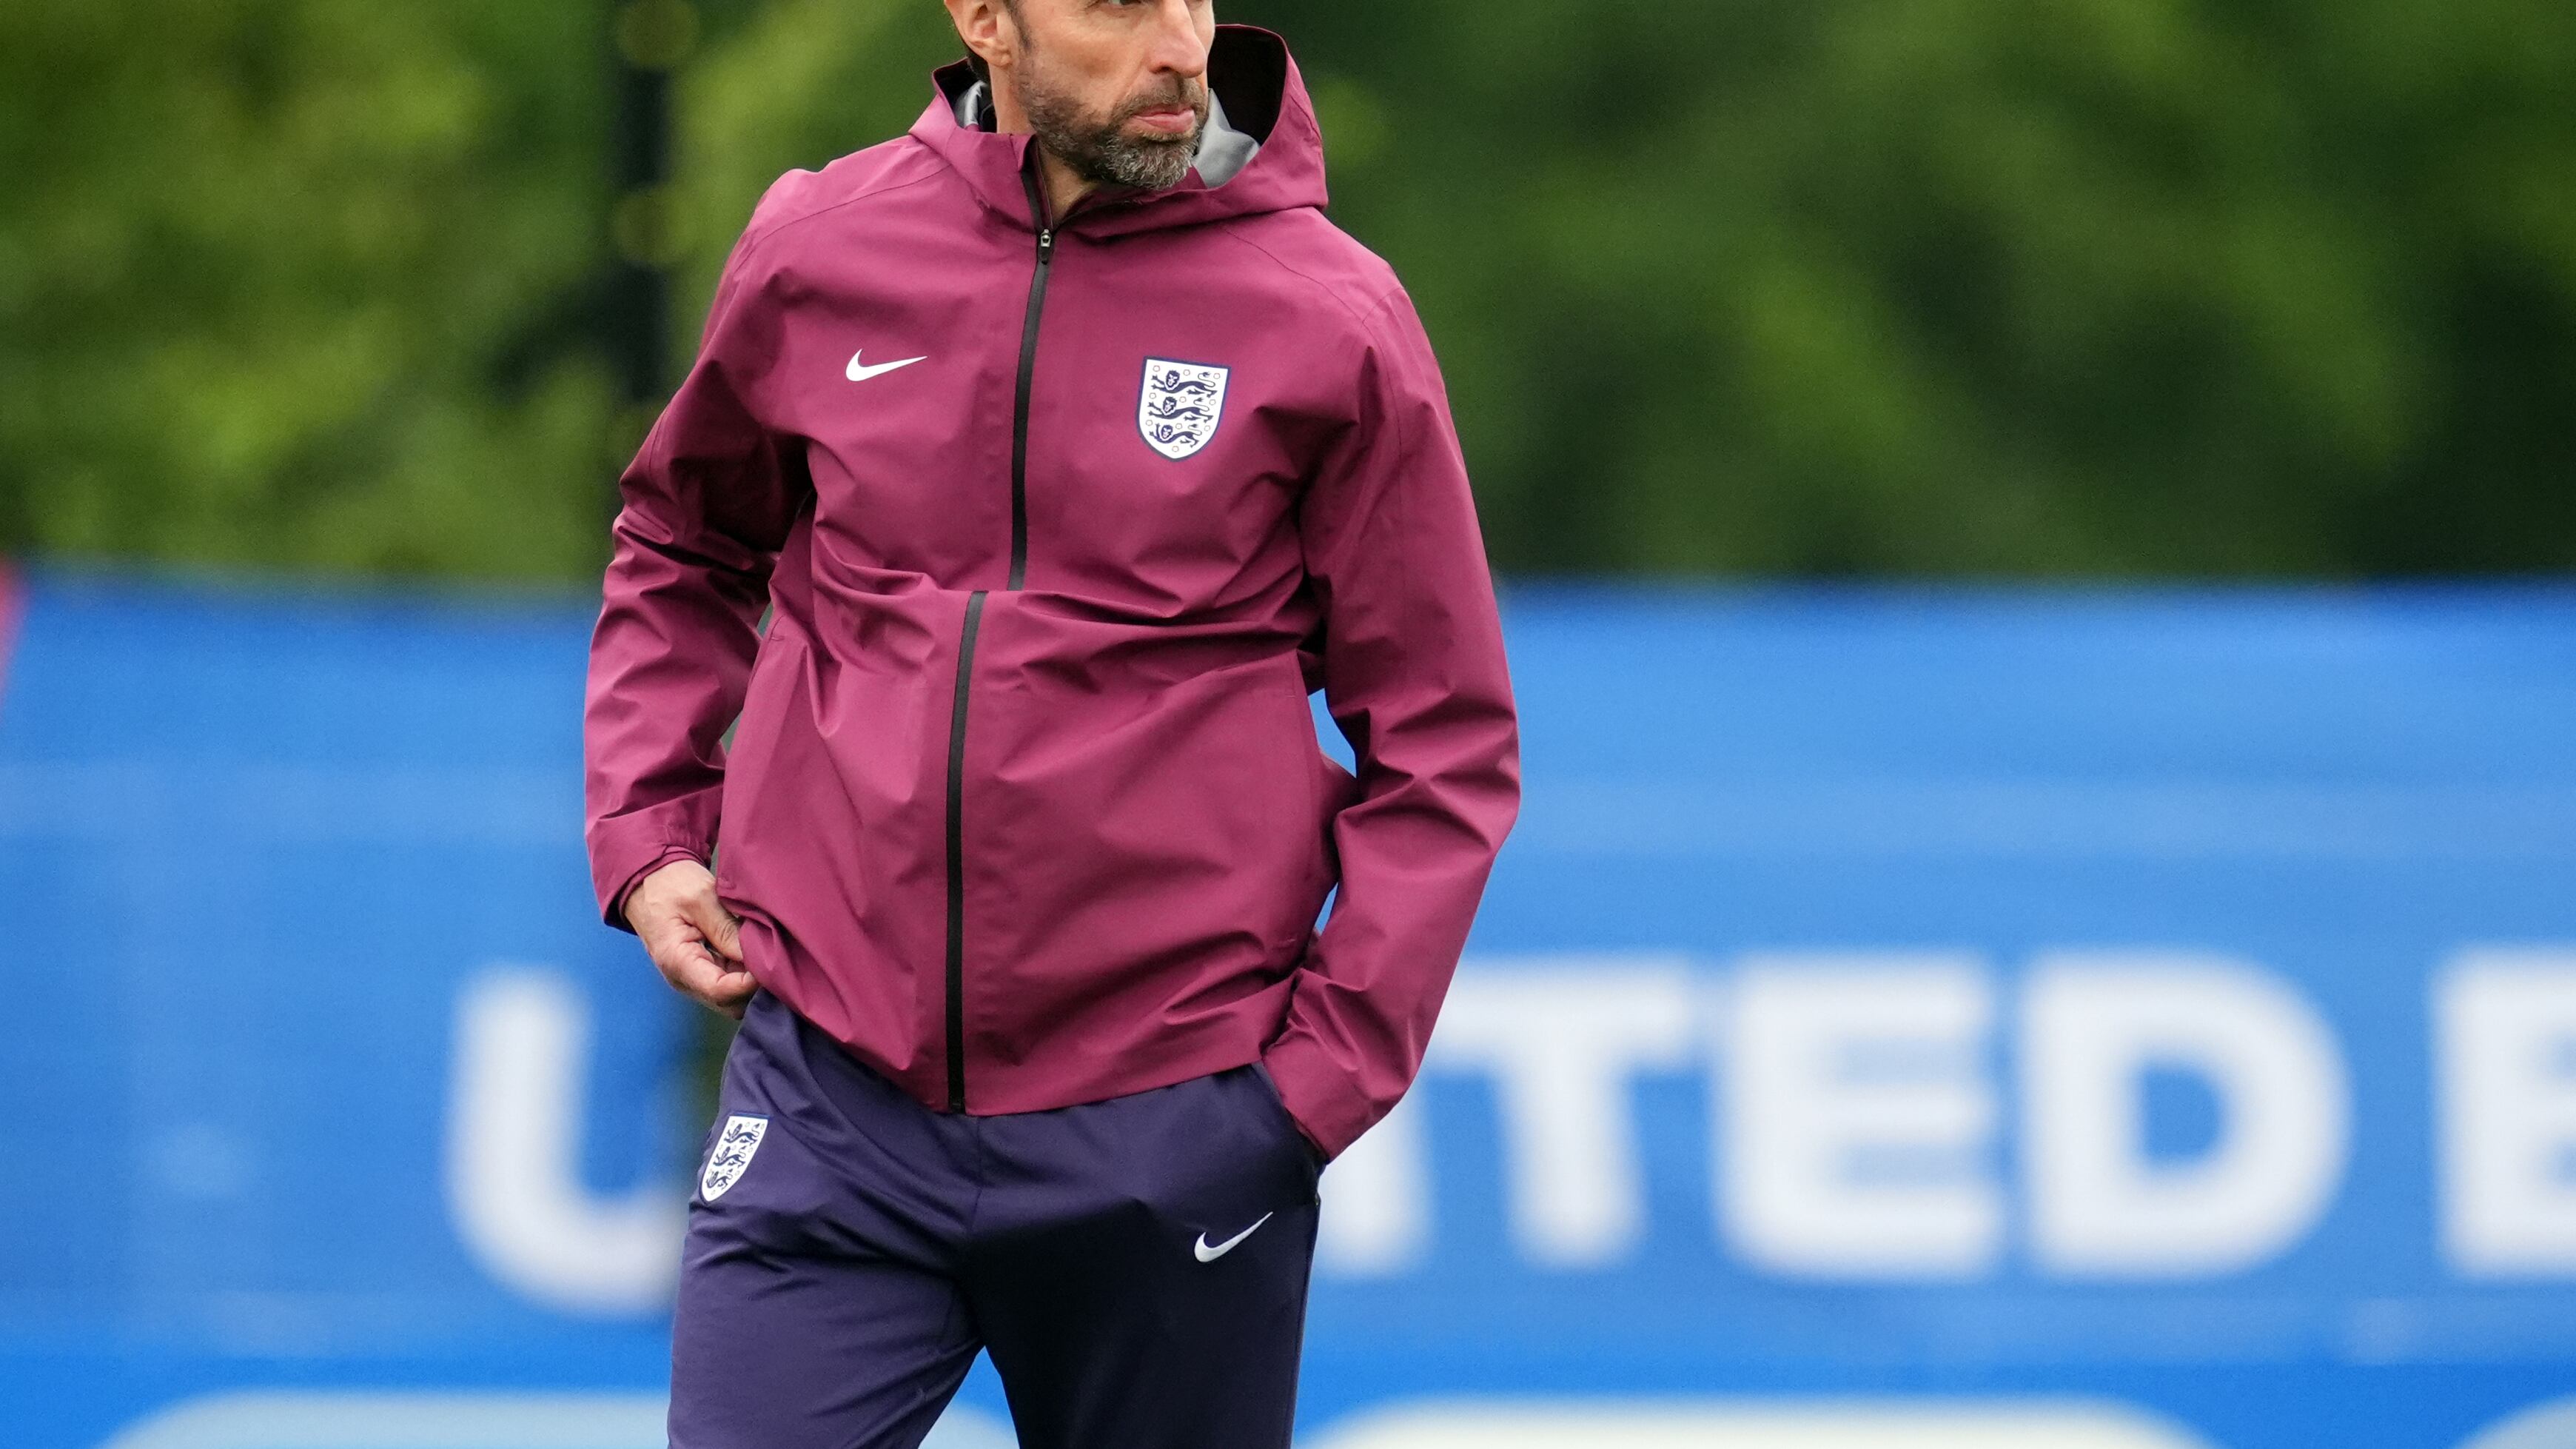 England manager Gareth Southgate has told his players to shut out noise